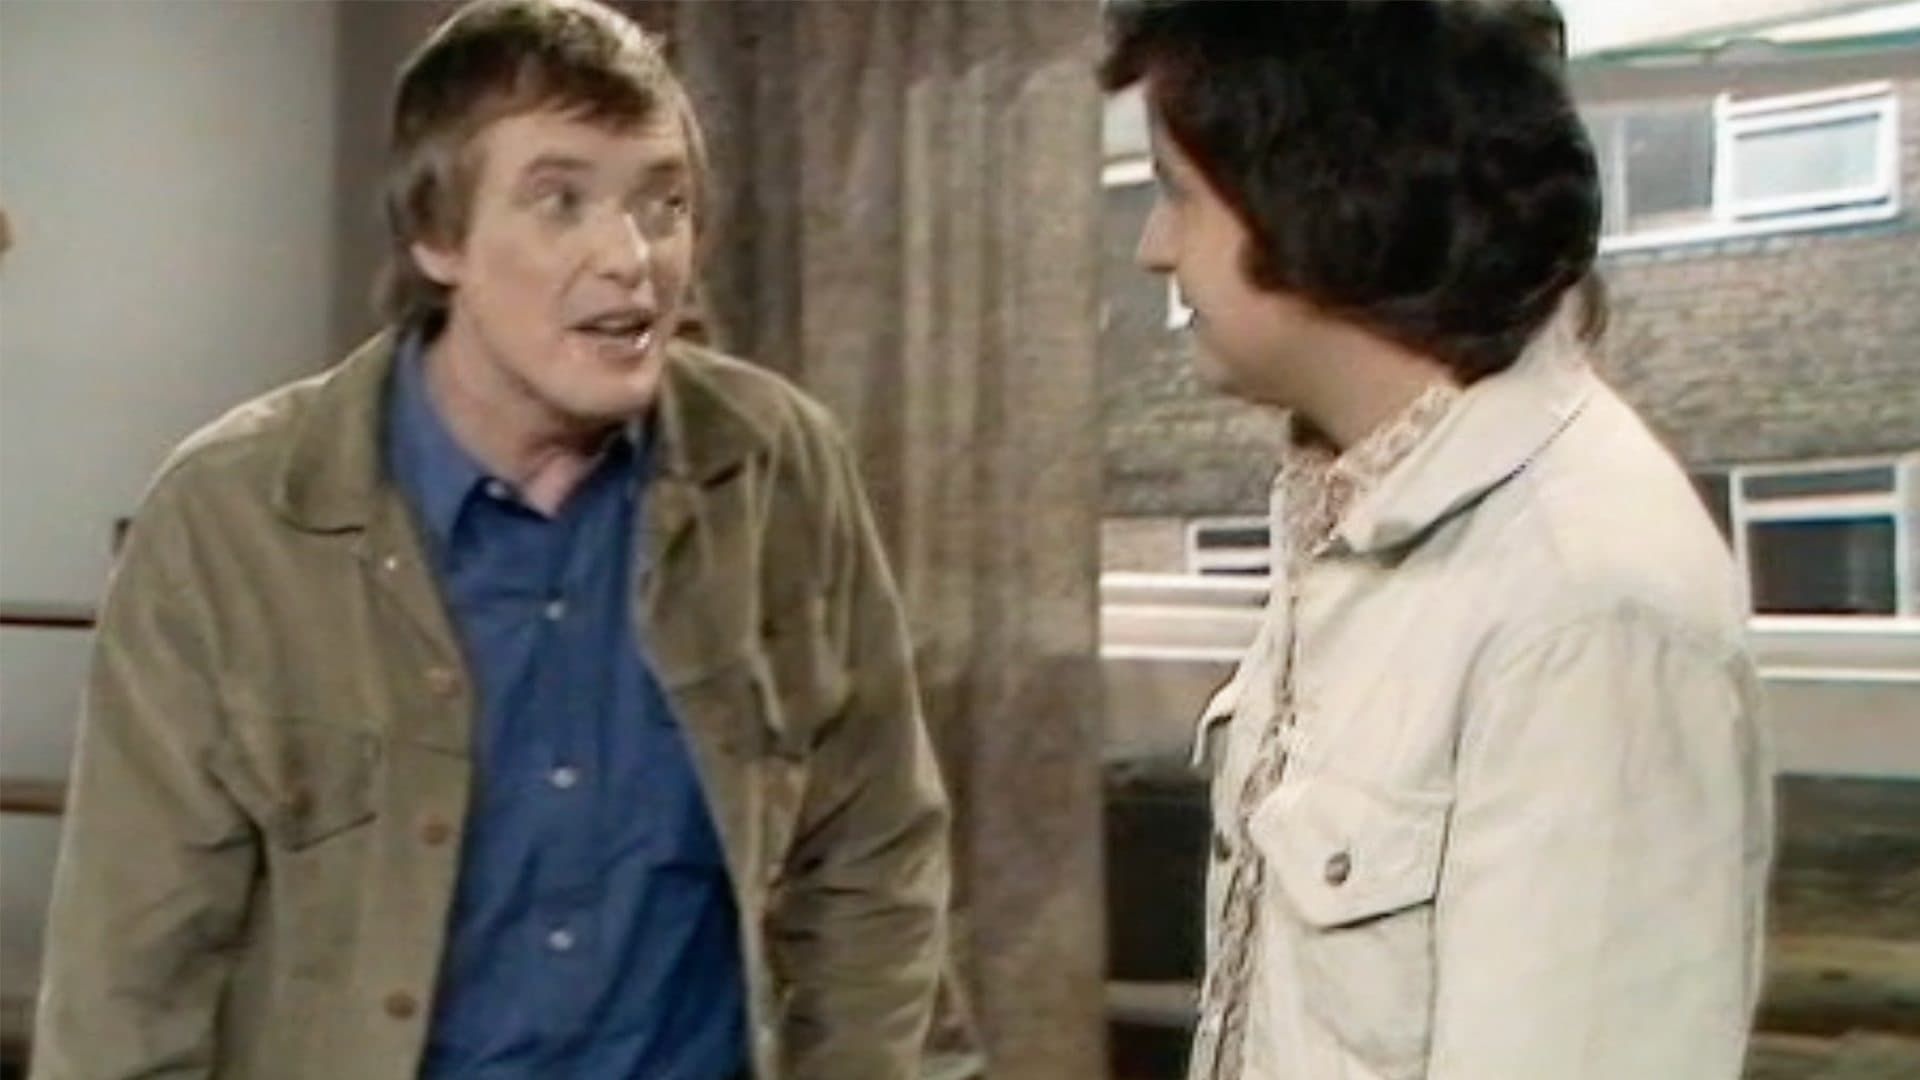 Whatever Happened to the Likely Lads? background